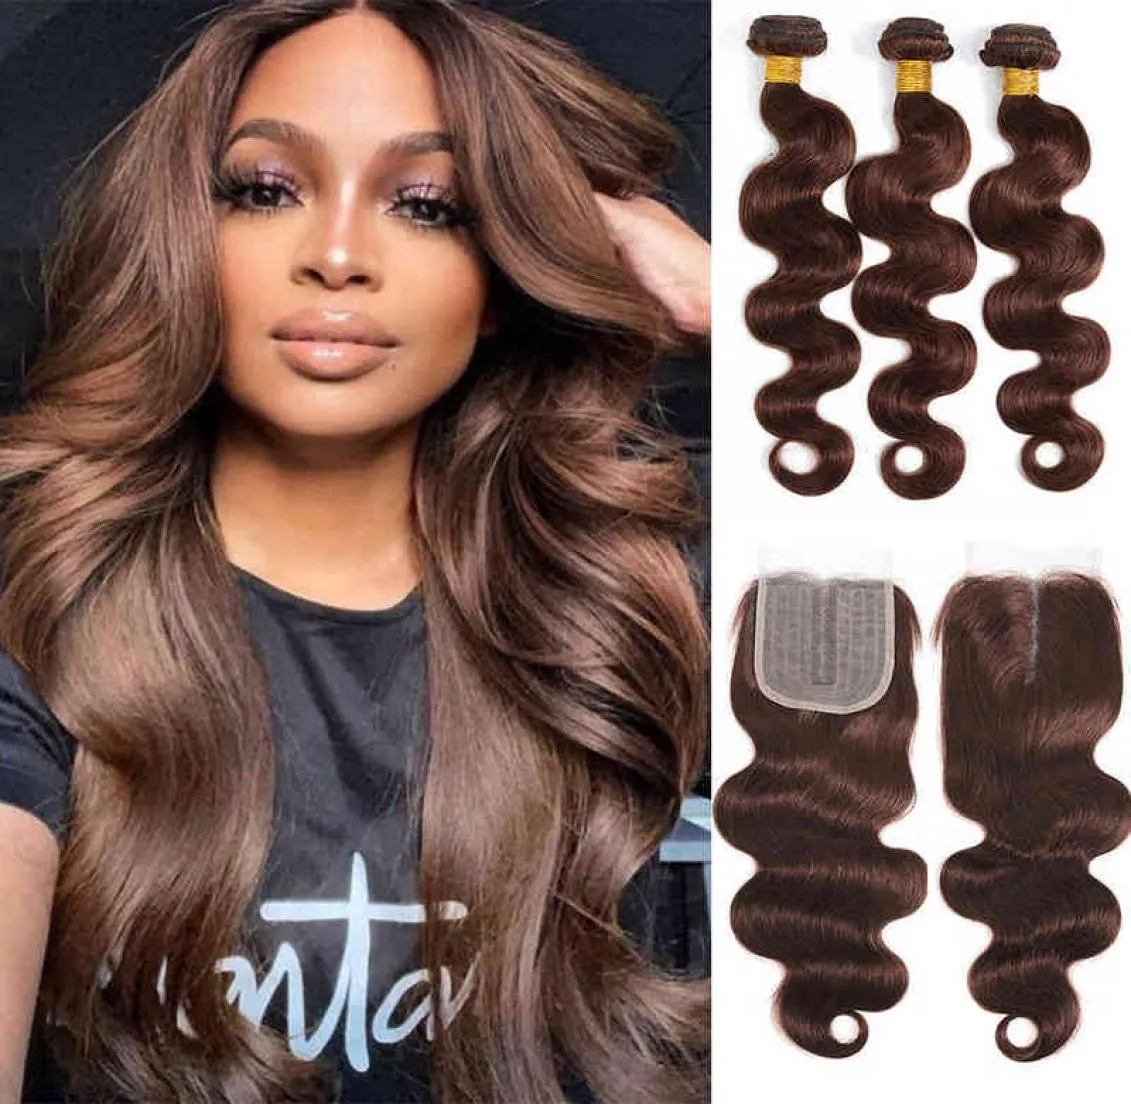 Ombre Body Wave Bundles with Closure Brazilian Human Hair Weave Blonde Remy Brown 3 4 t Lace 2206086547868